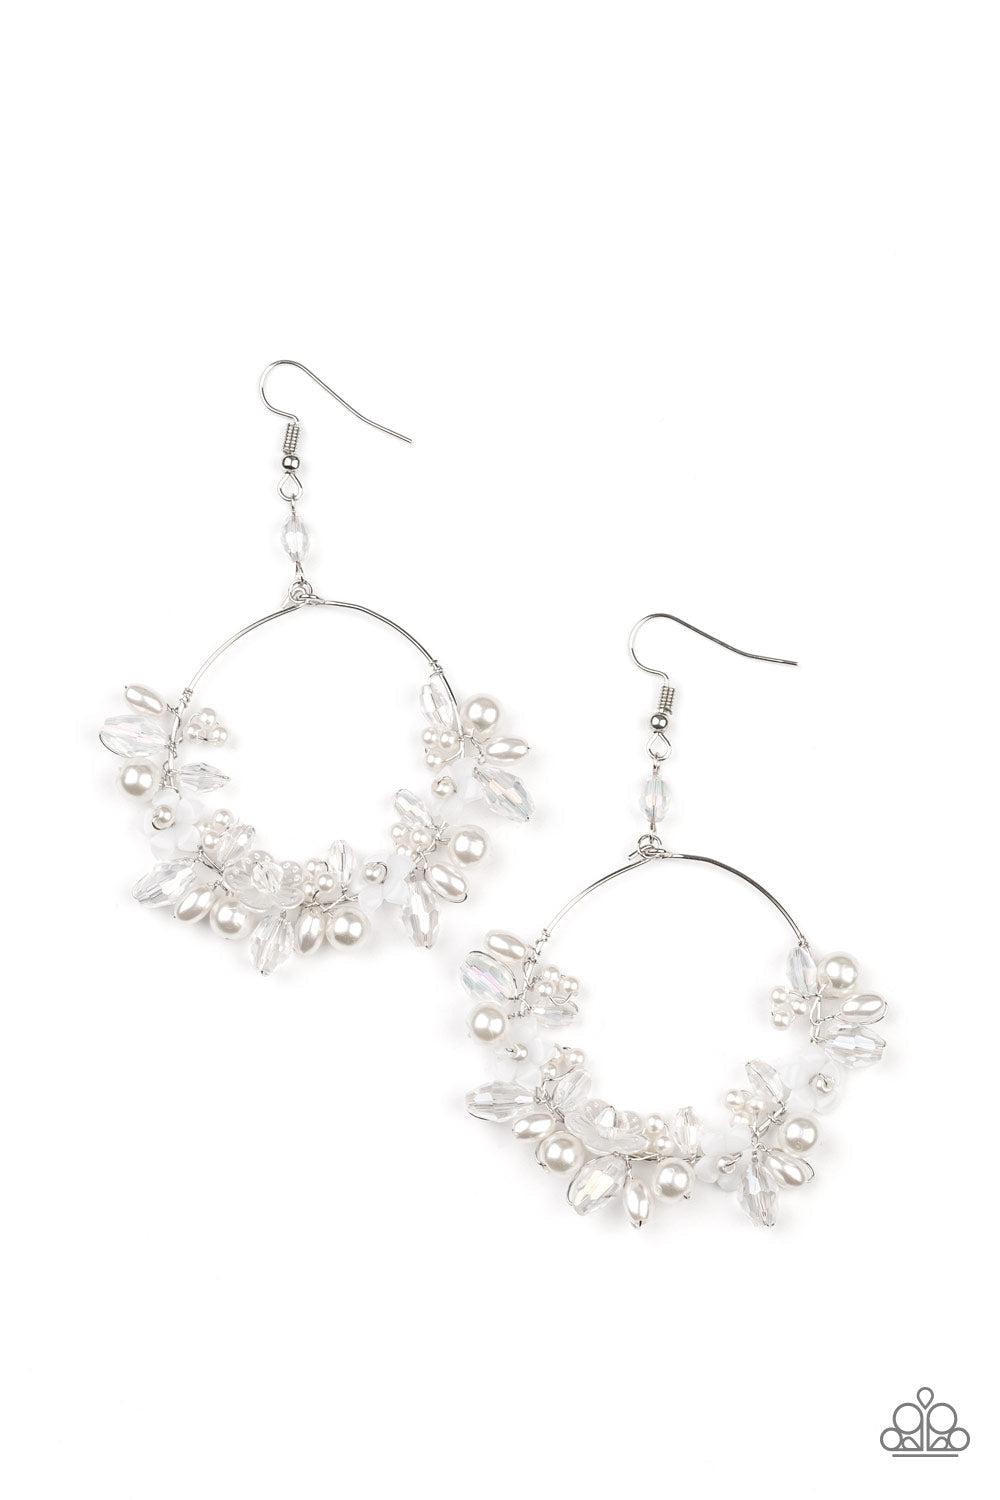 Floating Gardens White Pearl Floral Earrings - Paparazzi Accessories- lightbox - CarasShop.com - $5 Jewelry by Cara Jewels